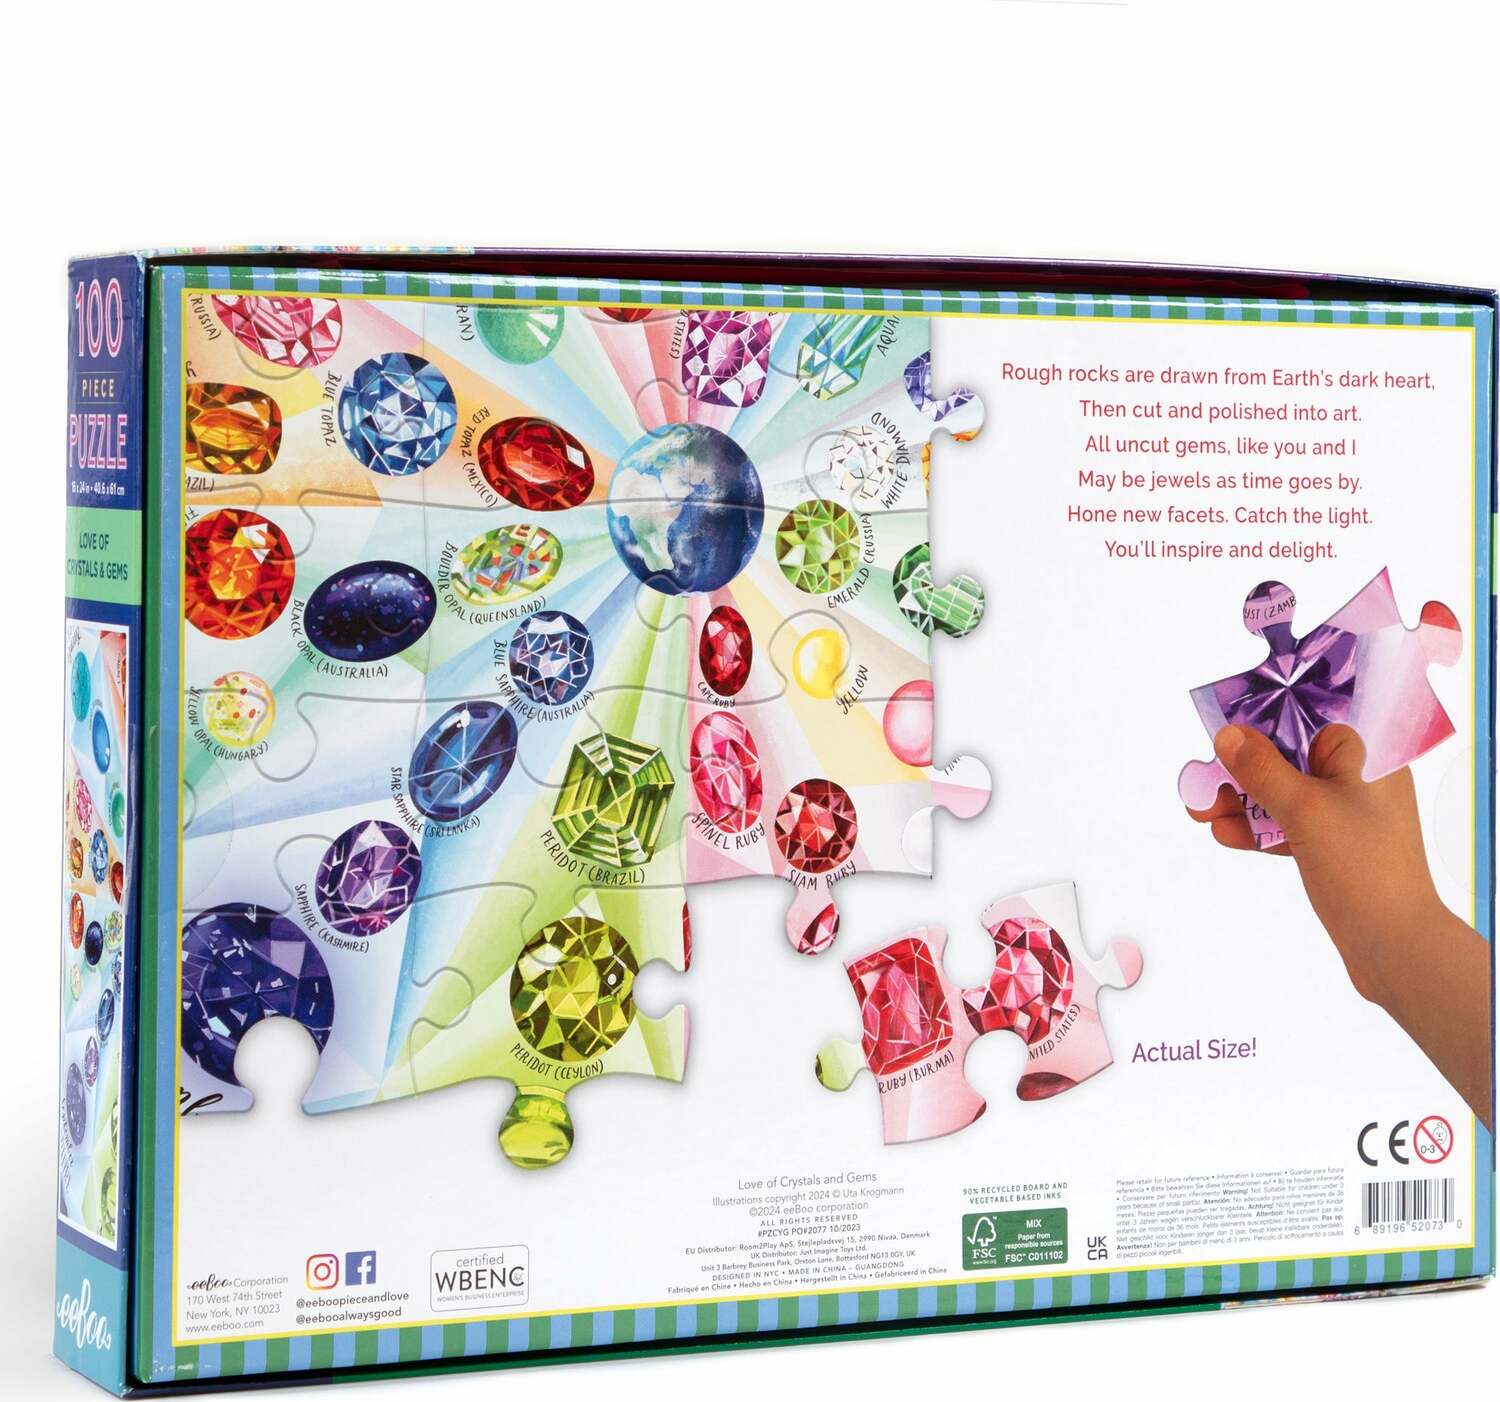 Love of Crystals and Gems 100 Piece Puzzle